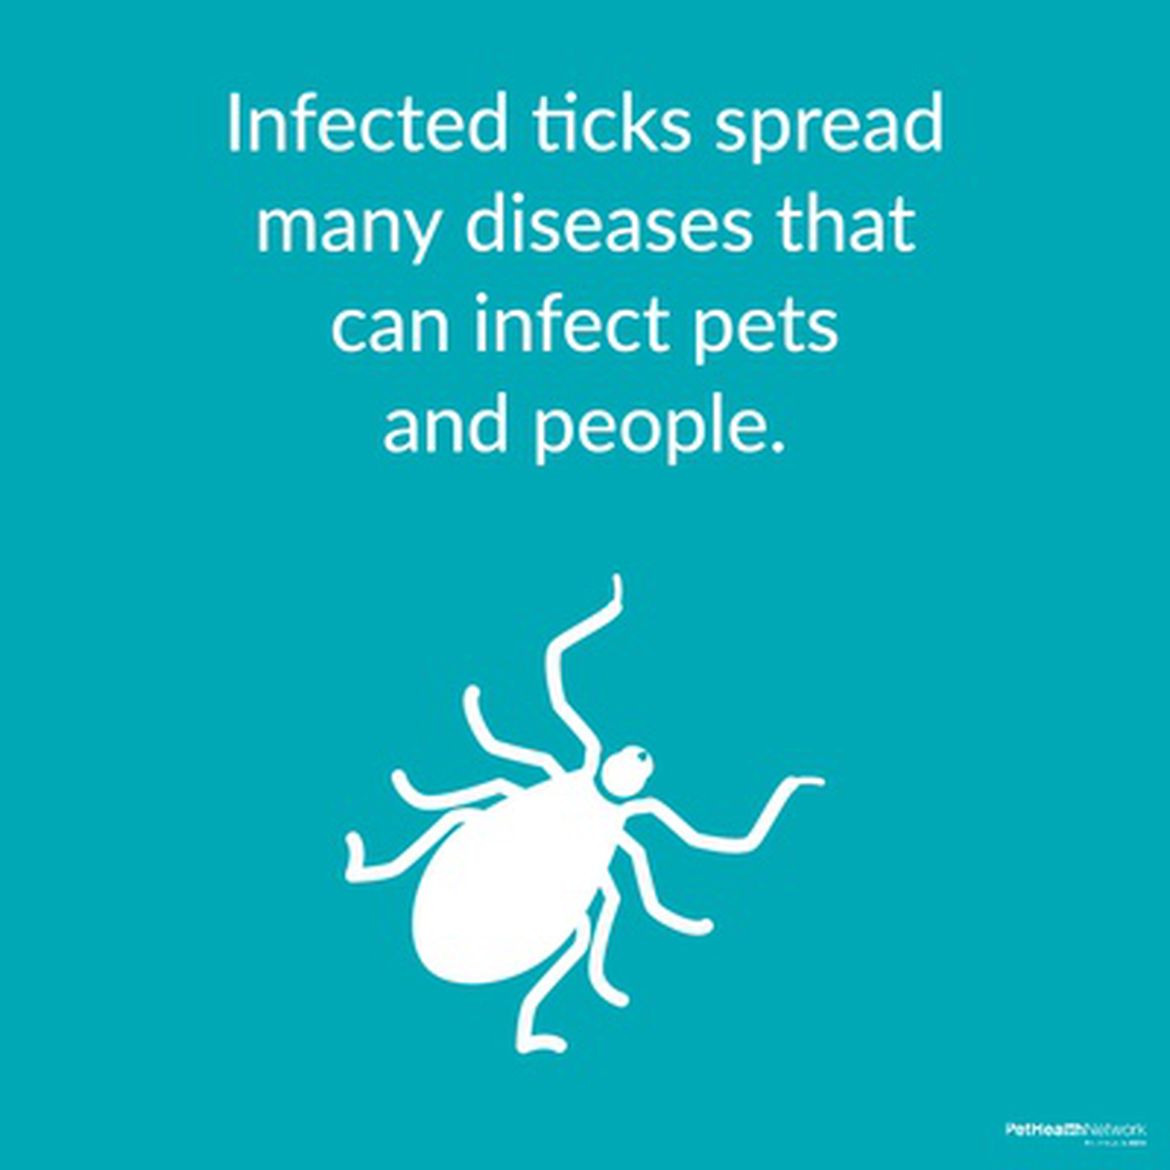 Social media post on how infected ticks spread diseases that humans can get.